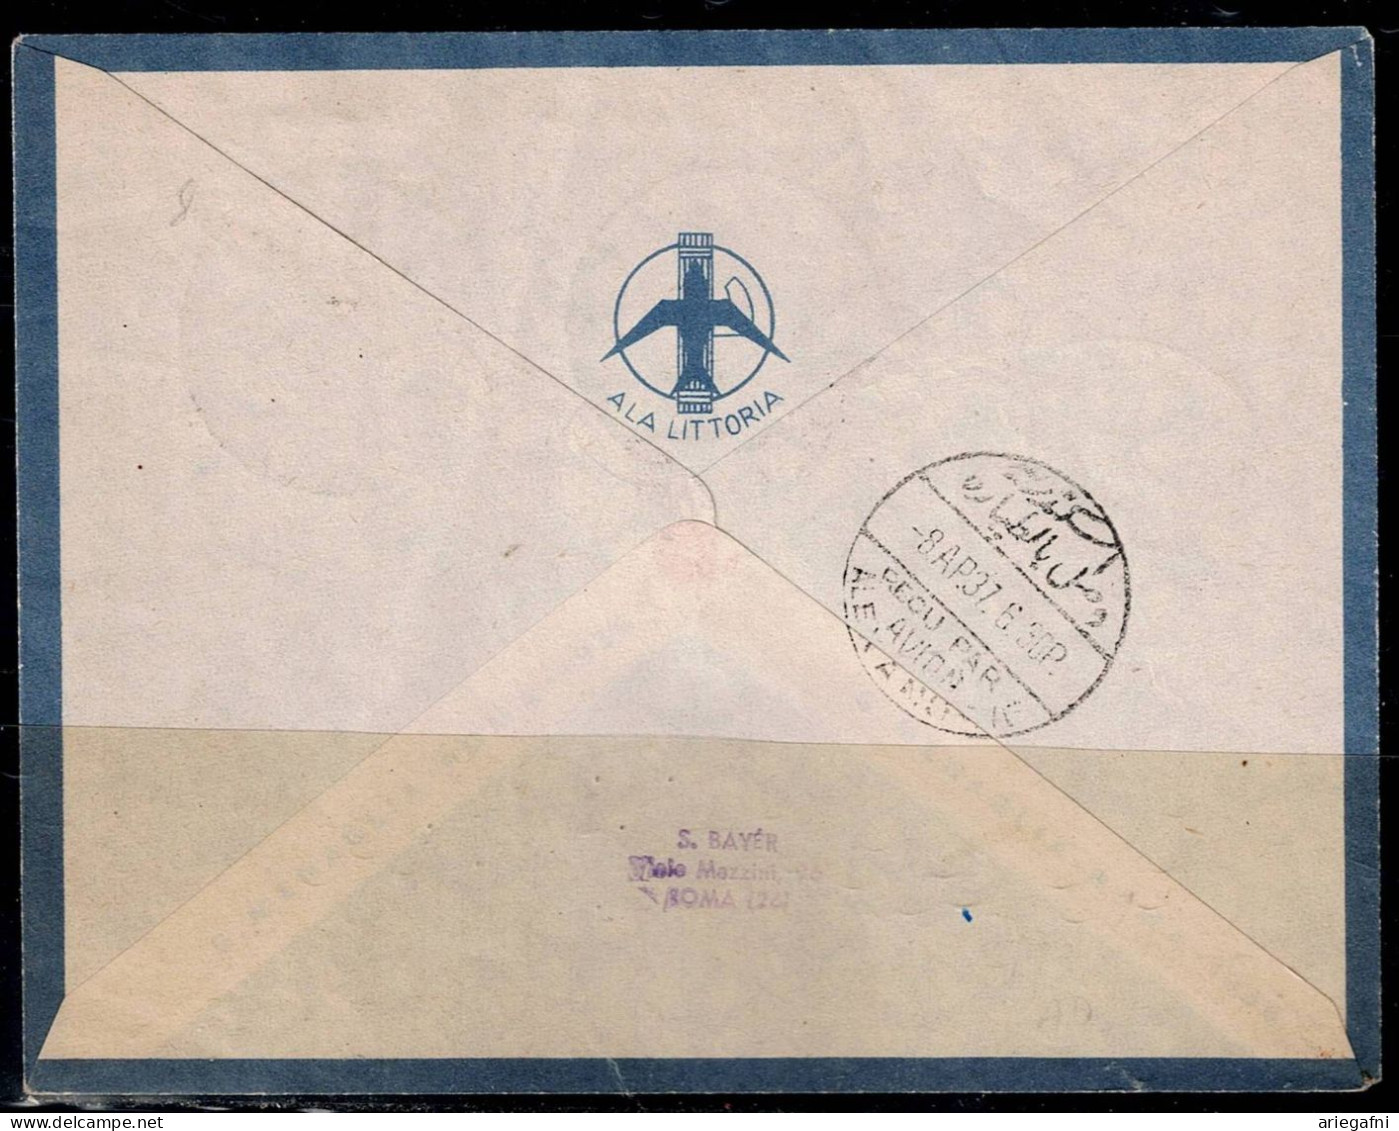 ISRAEL 1937 COVER FLYING BY AIR MAIL IN7/4/37 FROM ROMA VIA HAIFA TO ALESSANDRIA VF!! - Aéreo